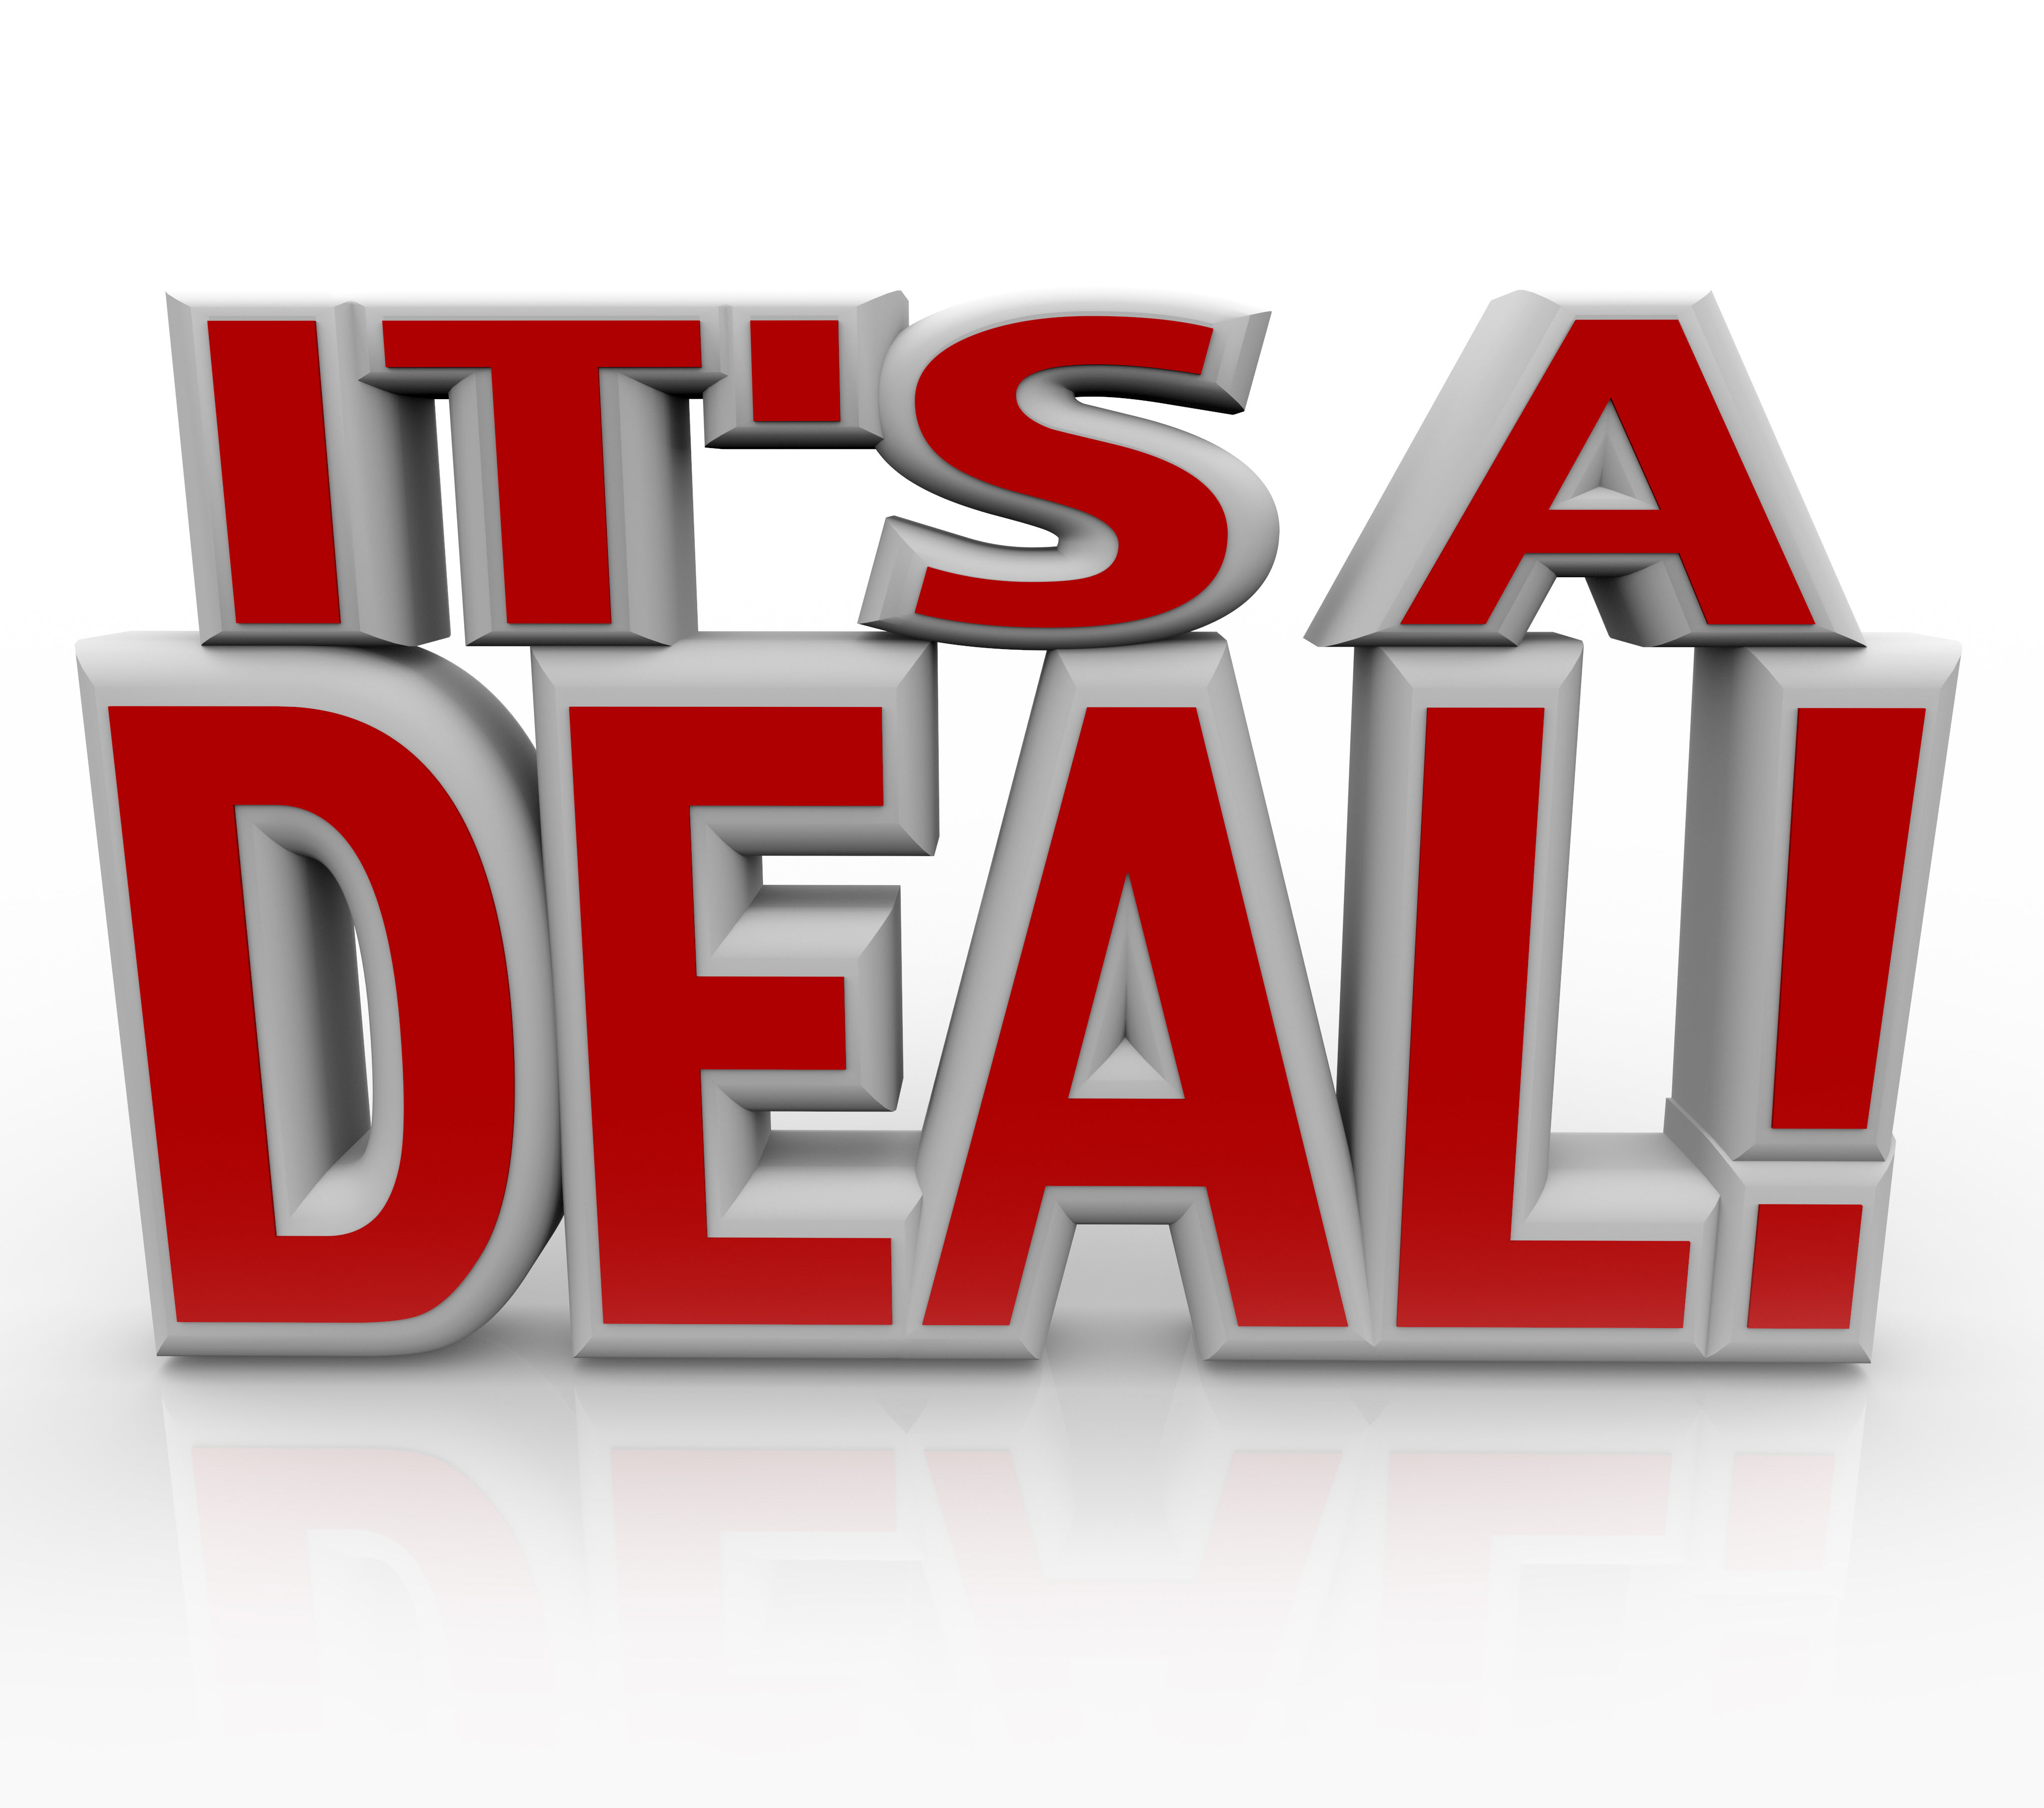 Deal. Deal is a deal. Картинка la deal. Big deal картинка для презентаций. Can i deal